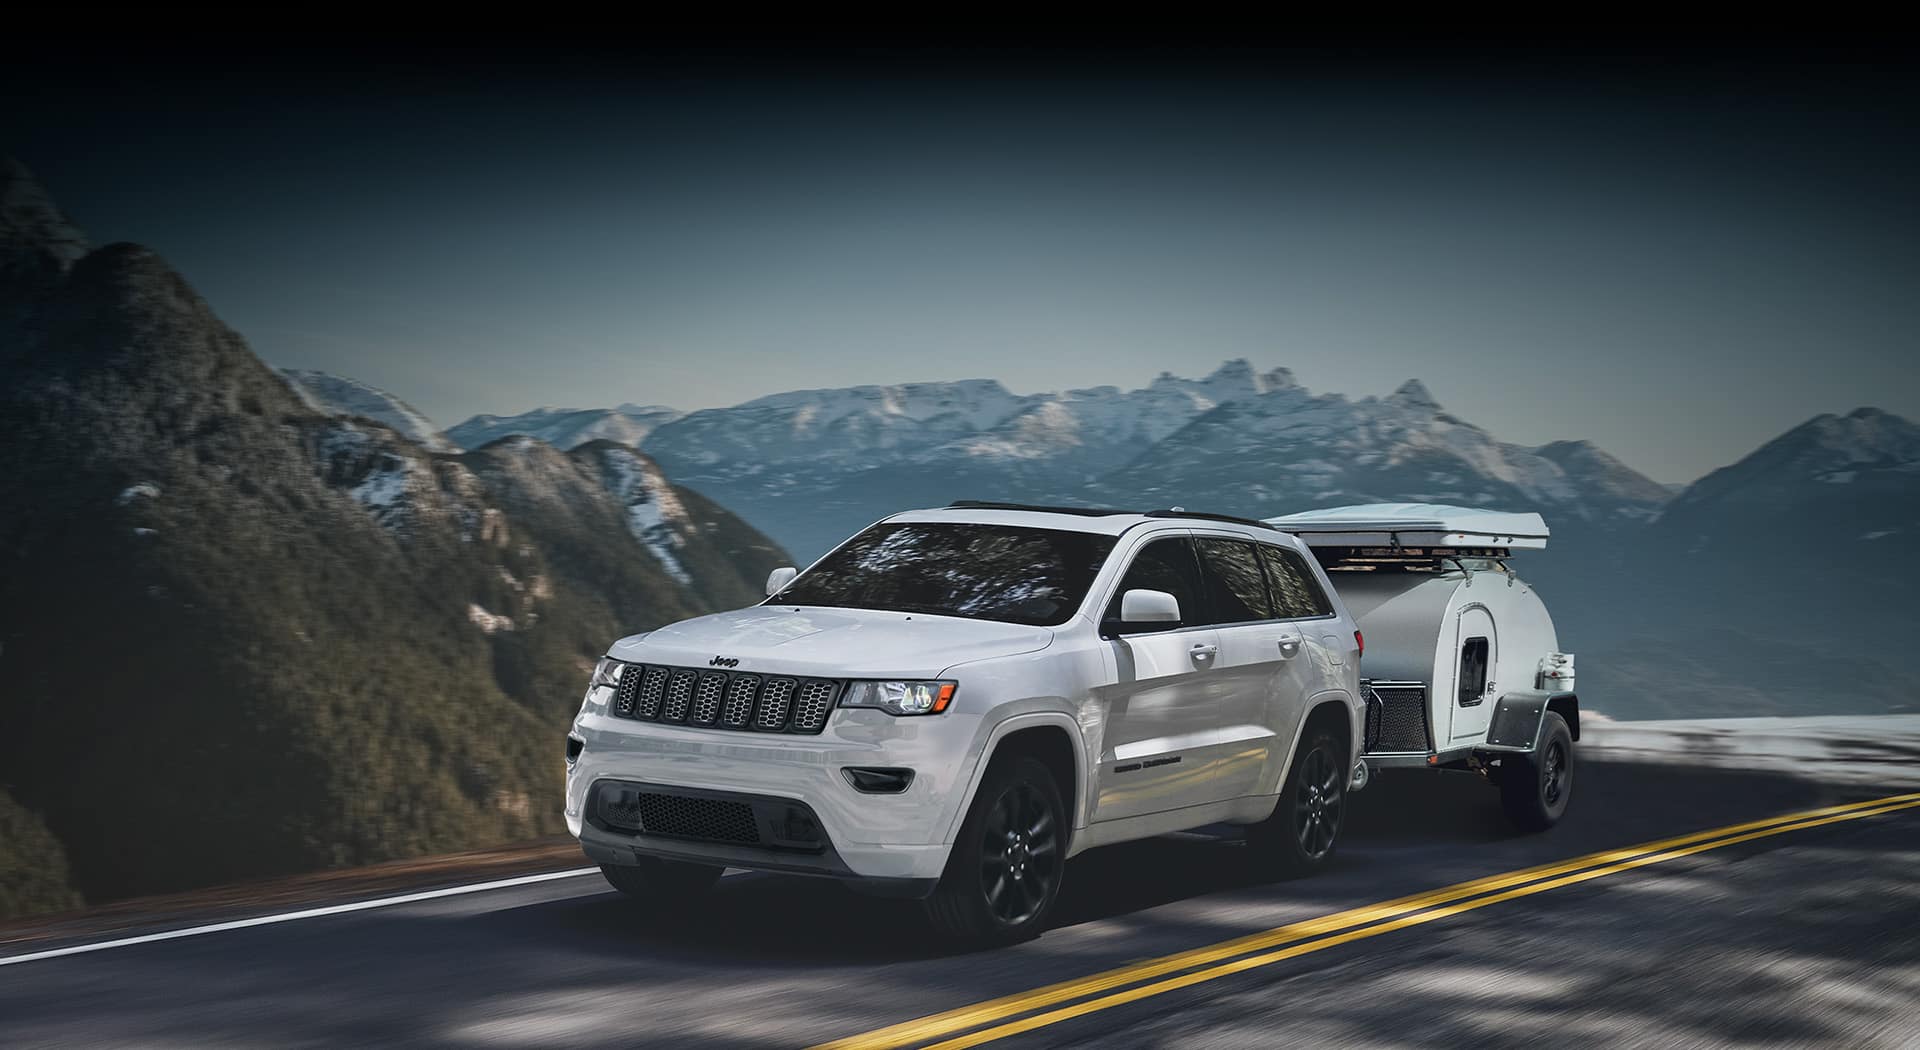 The 2022 Jeep Grand Cherokee WK Laredo X with the Altitude Appearance Package towing a small trailer.